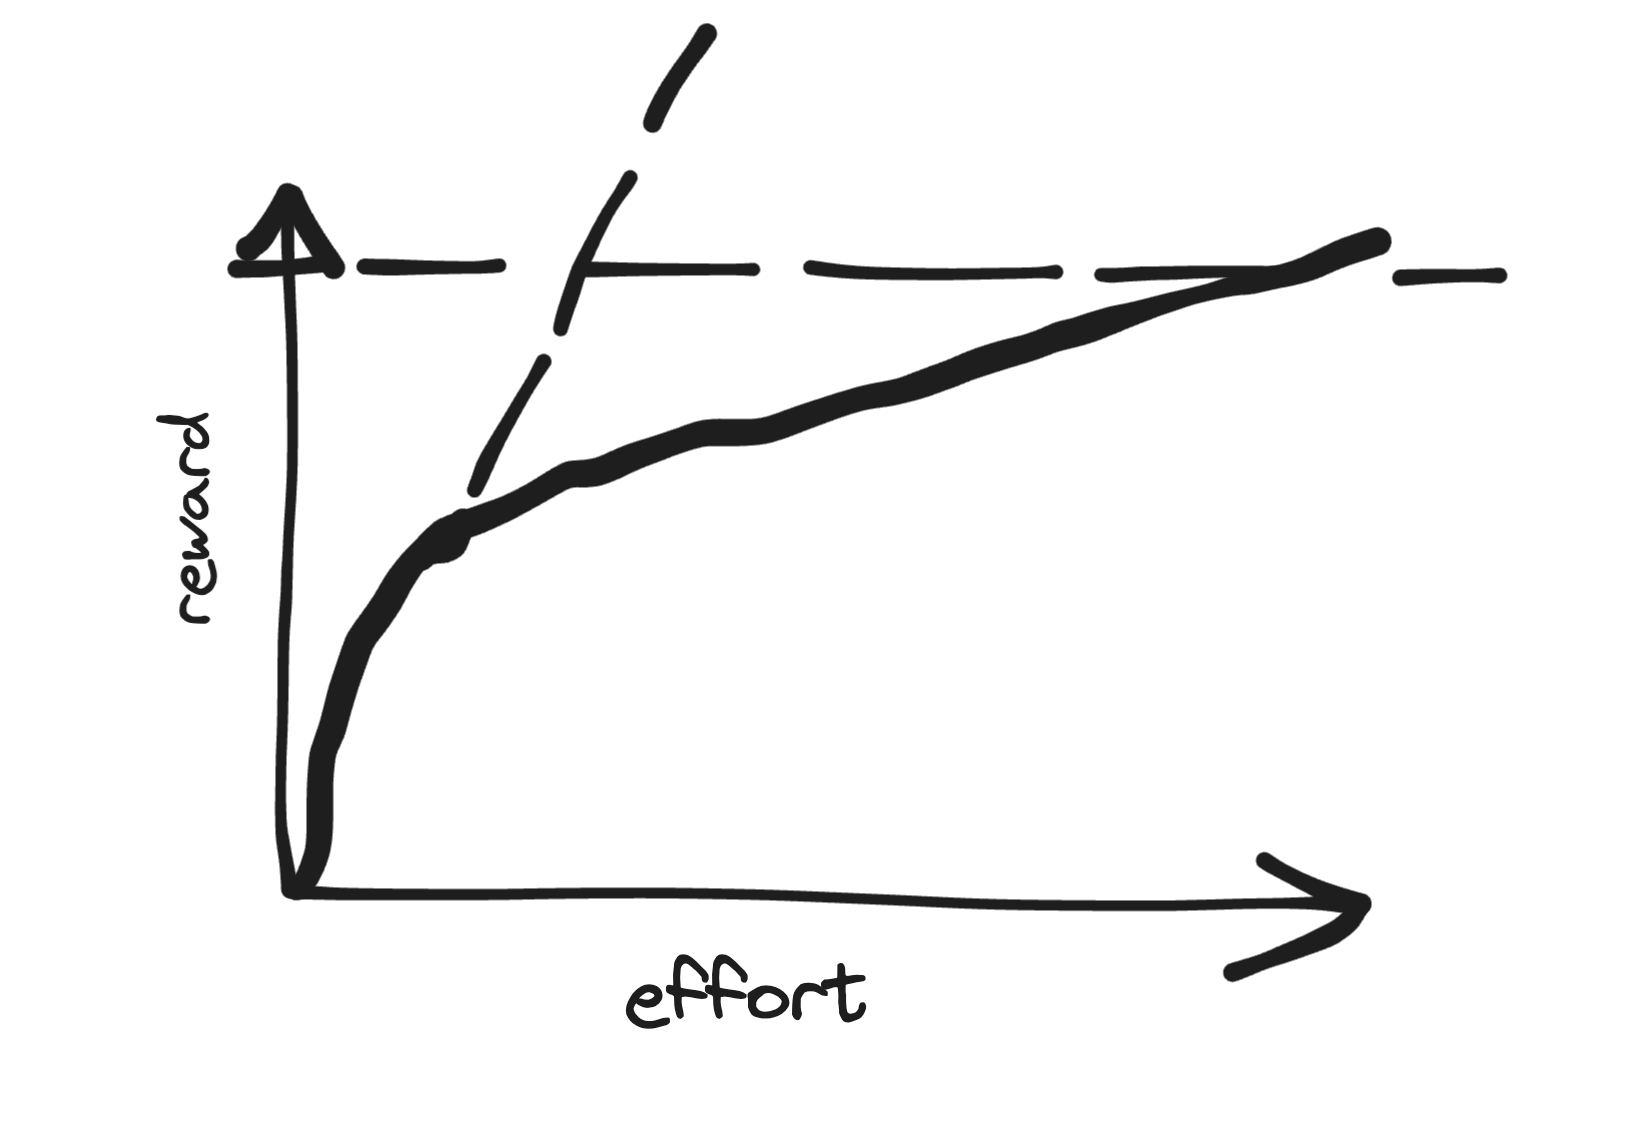 Effort-reward schedule. The line starts off giving a high reward for initial effort, then becomes much flatter. But a dashed shedule is shown showing an alternative option available to the player. Once the schedule reaches a given horizontal line the player has the opportunity to level up